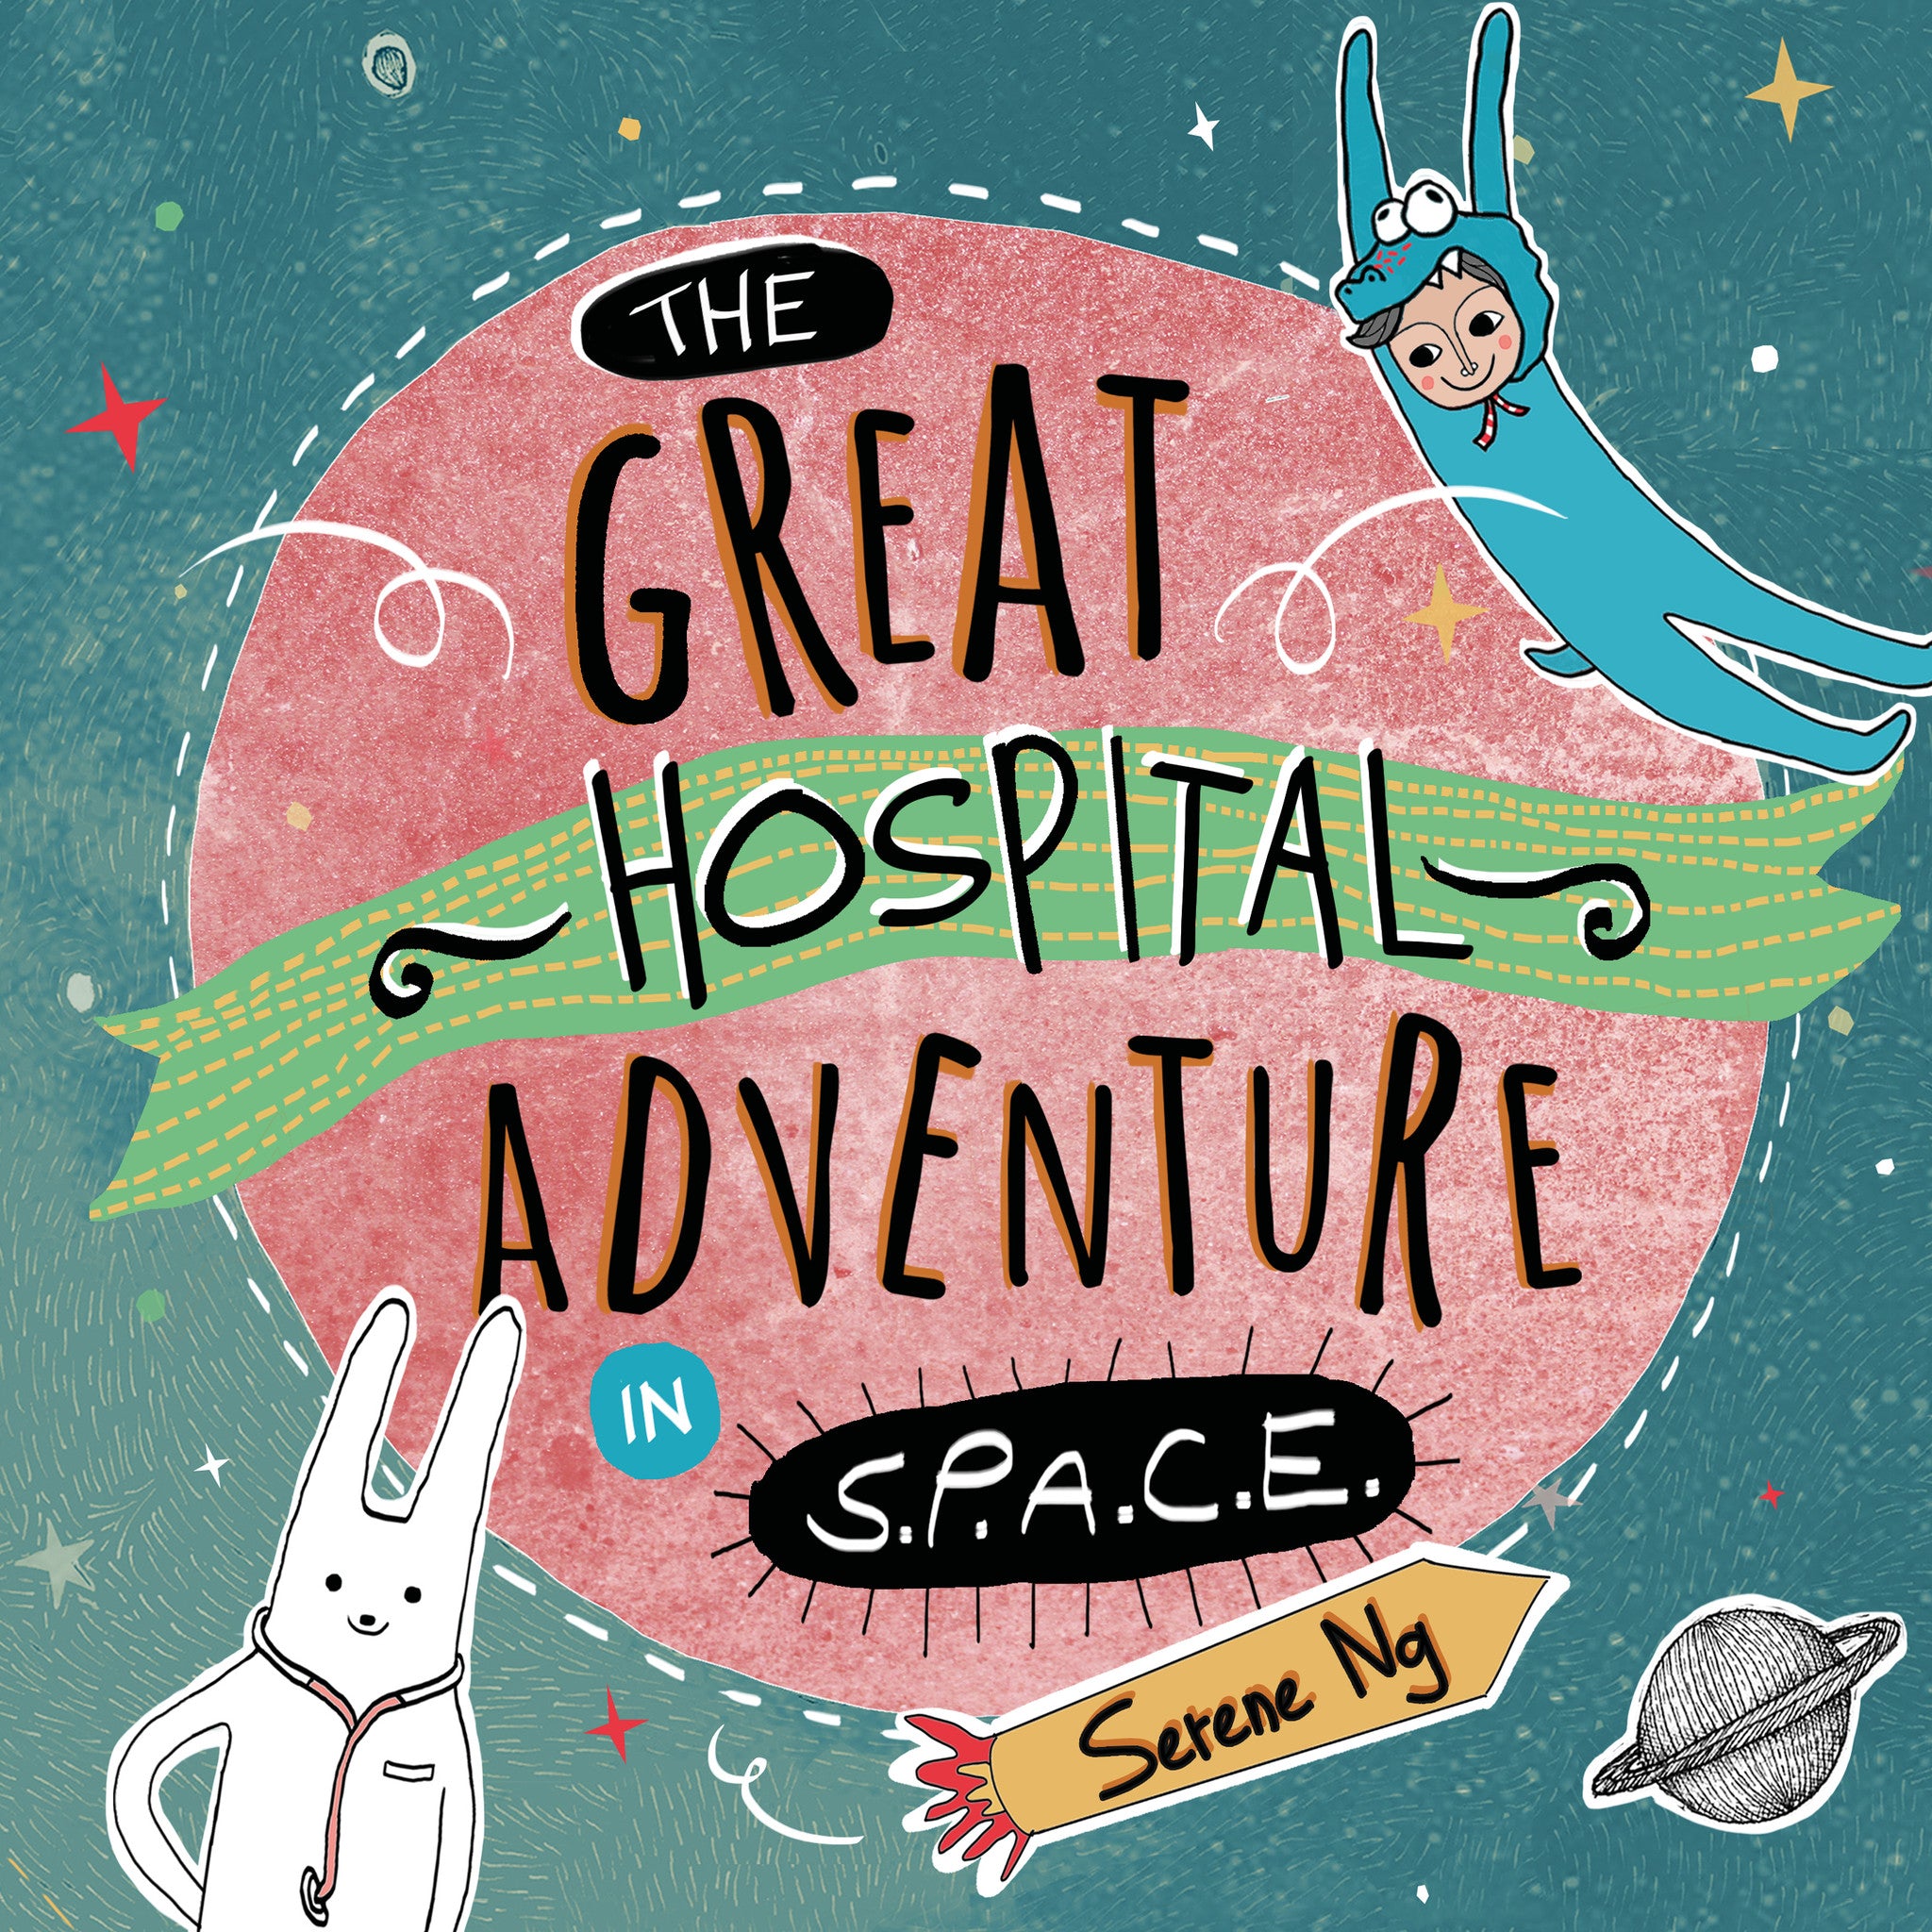 The Great Hospital Adventure in Space